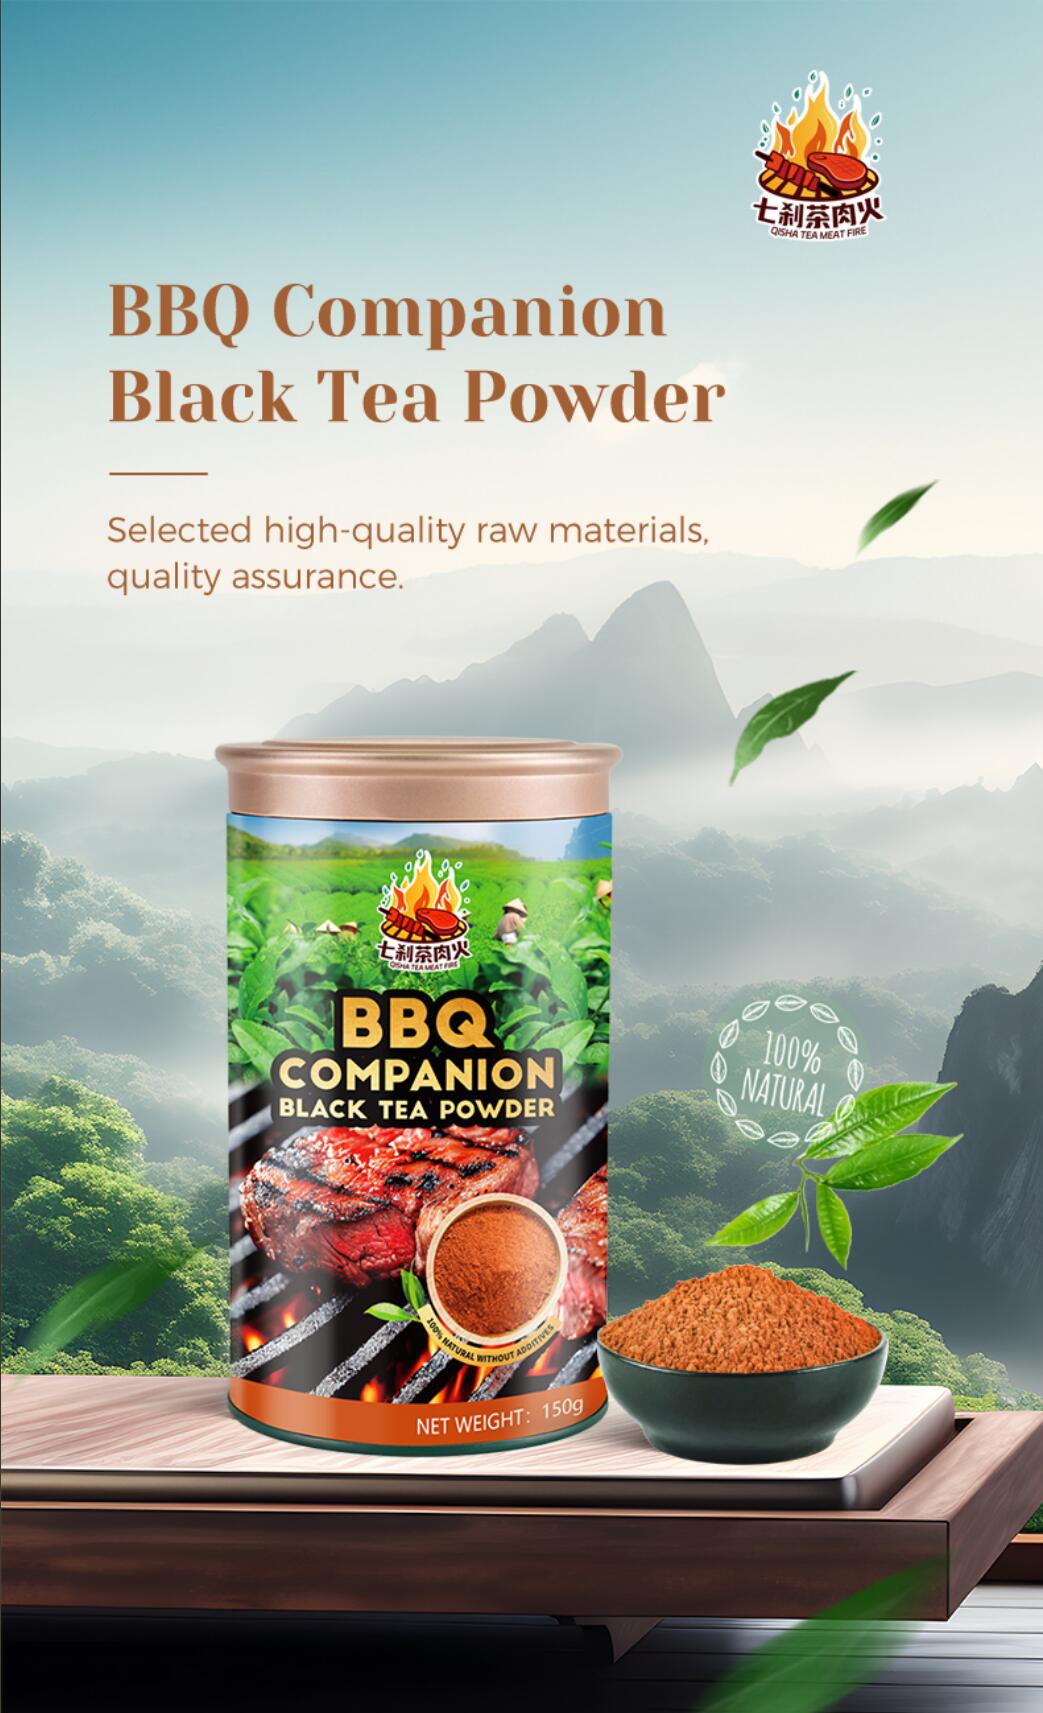 Chinese Tea Powder Seasoning: The Magical Secret to Delicious Barbecue插图1